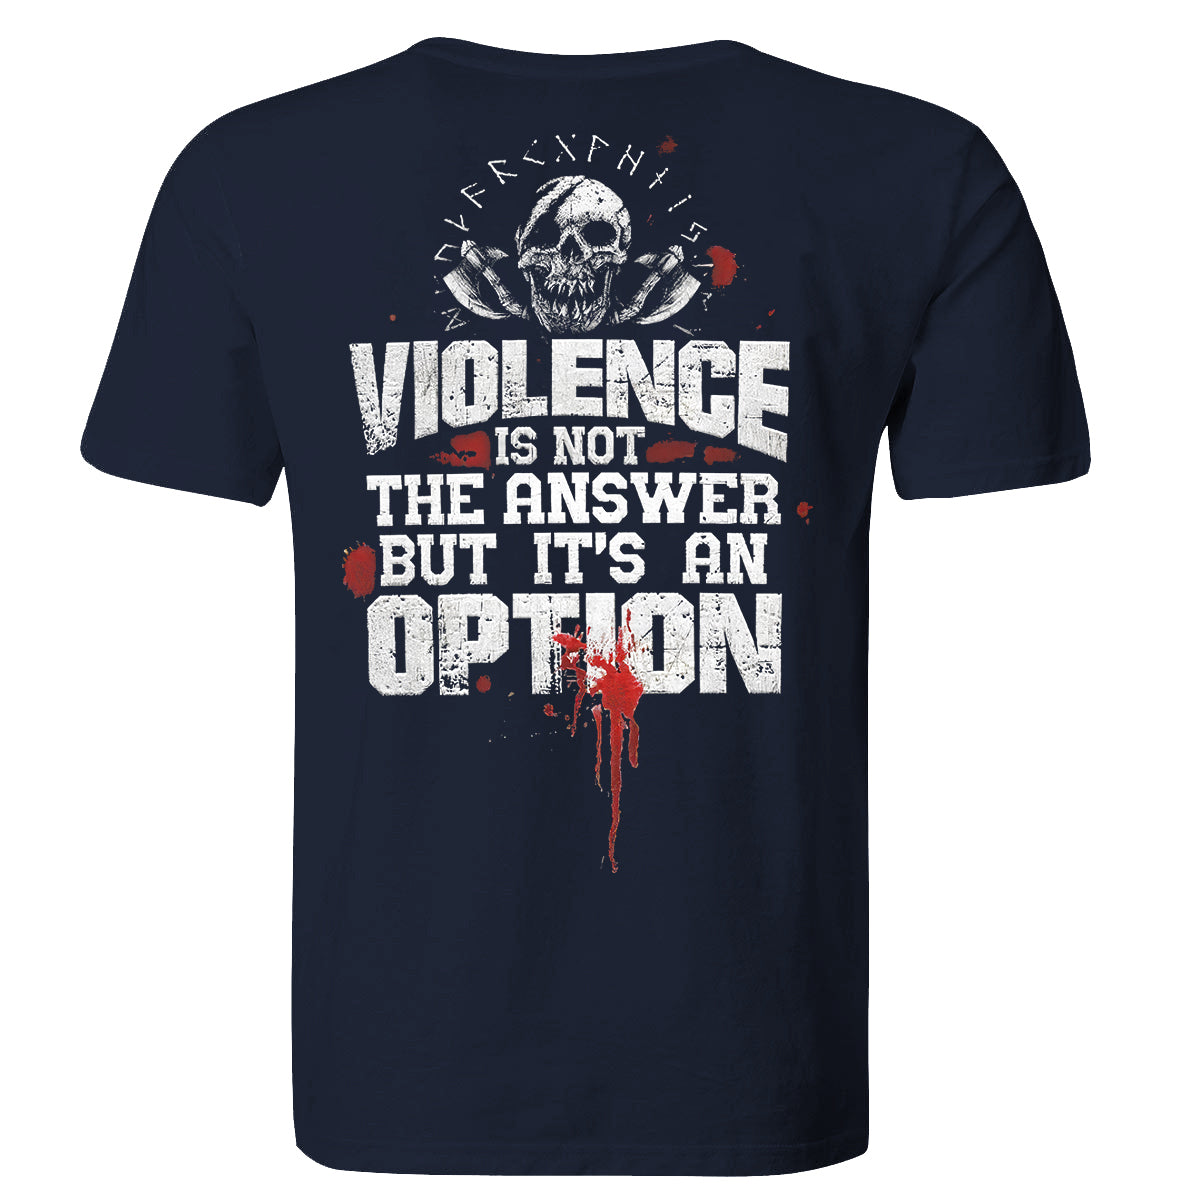 Vikings Violence Is Not The Answer Printed Men's T-shirt